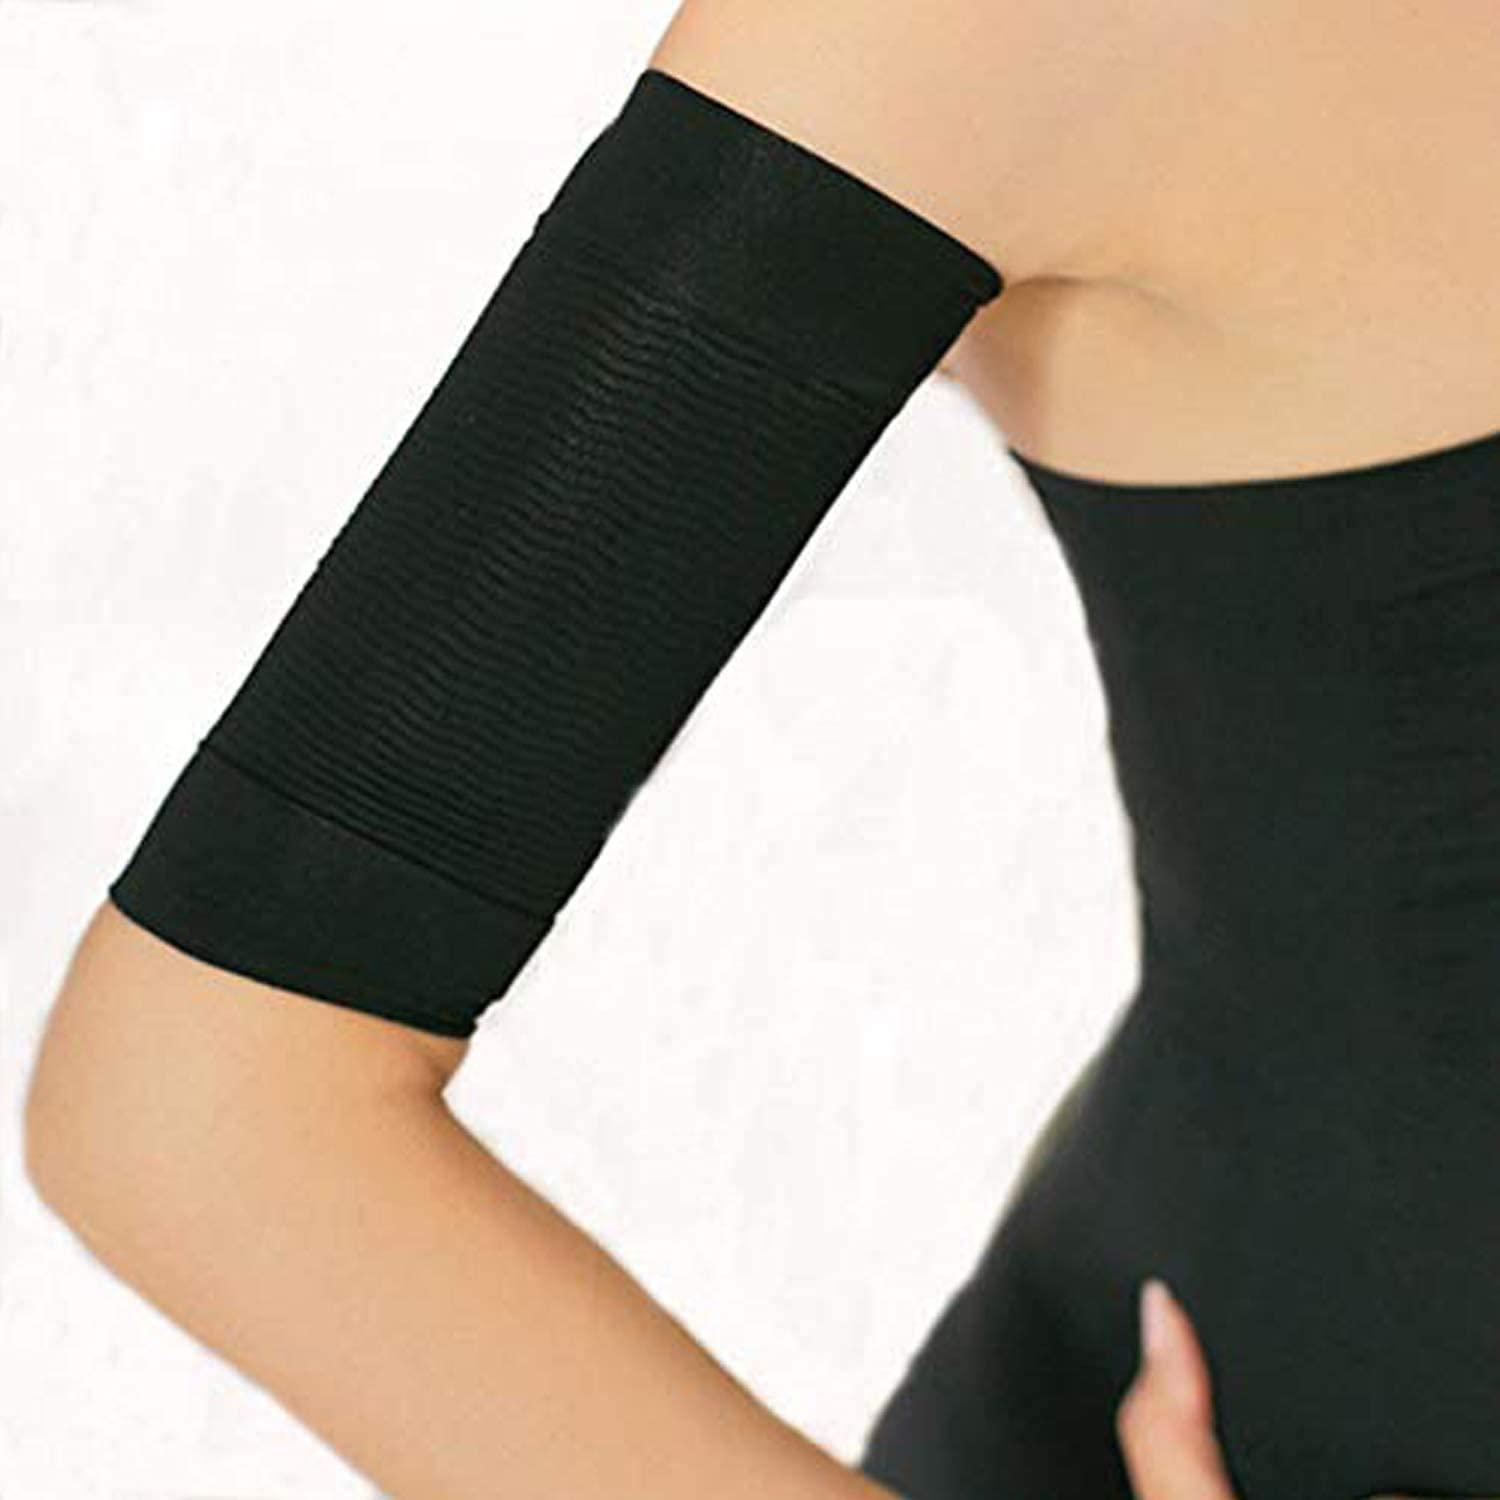 Arm Slimming Shaper Wrap Arm Compression Sleeve Women Weight Loss Upper Arm  Shaper Helps Tone Shape Upper Arms Sleeve for Women 2Pair (2Black)